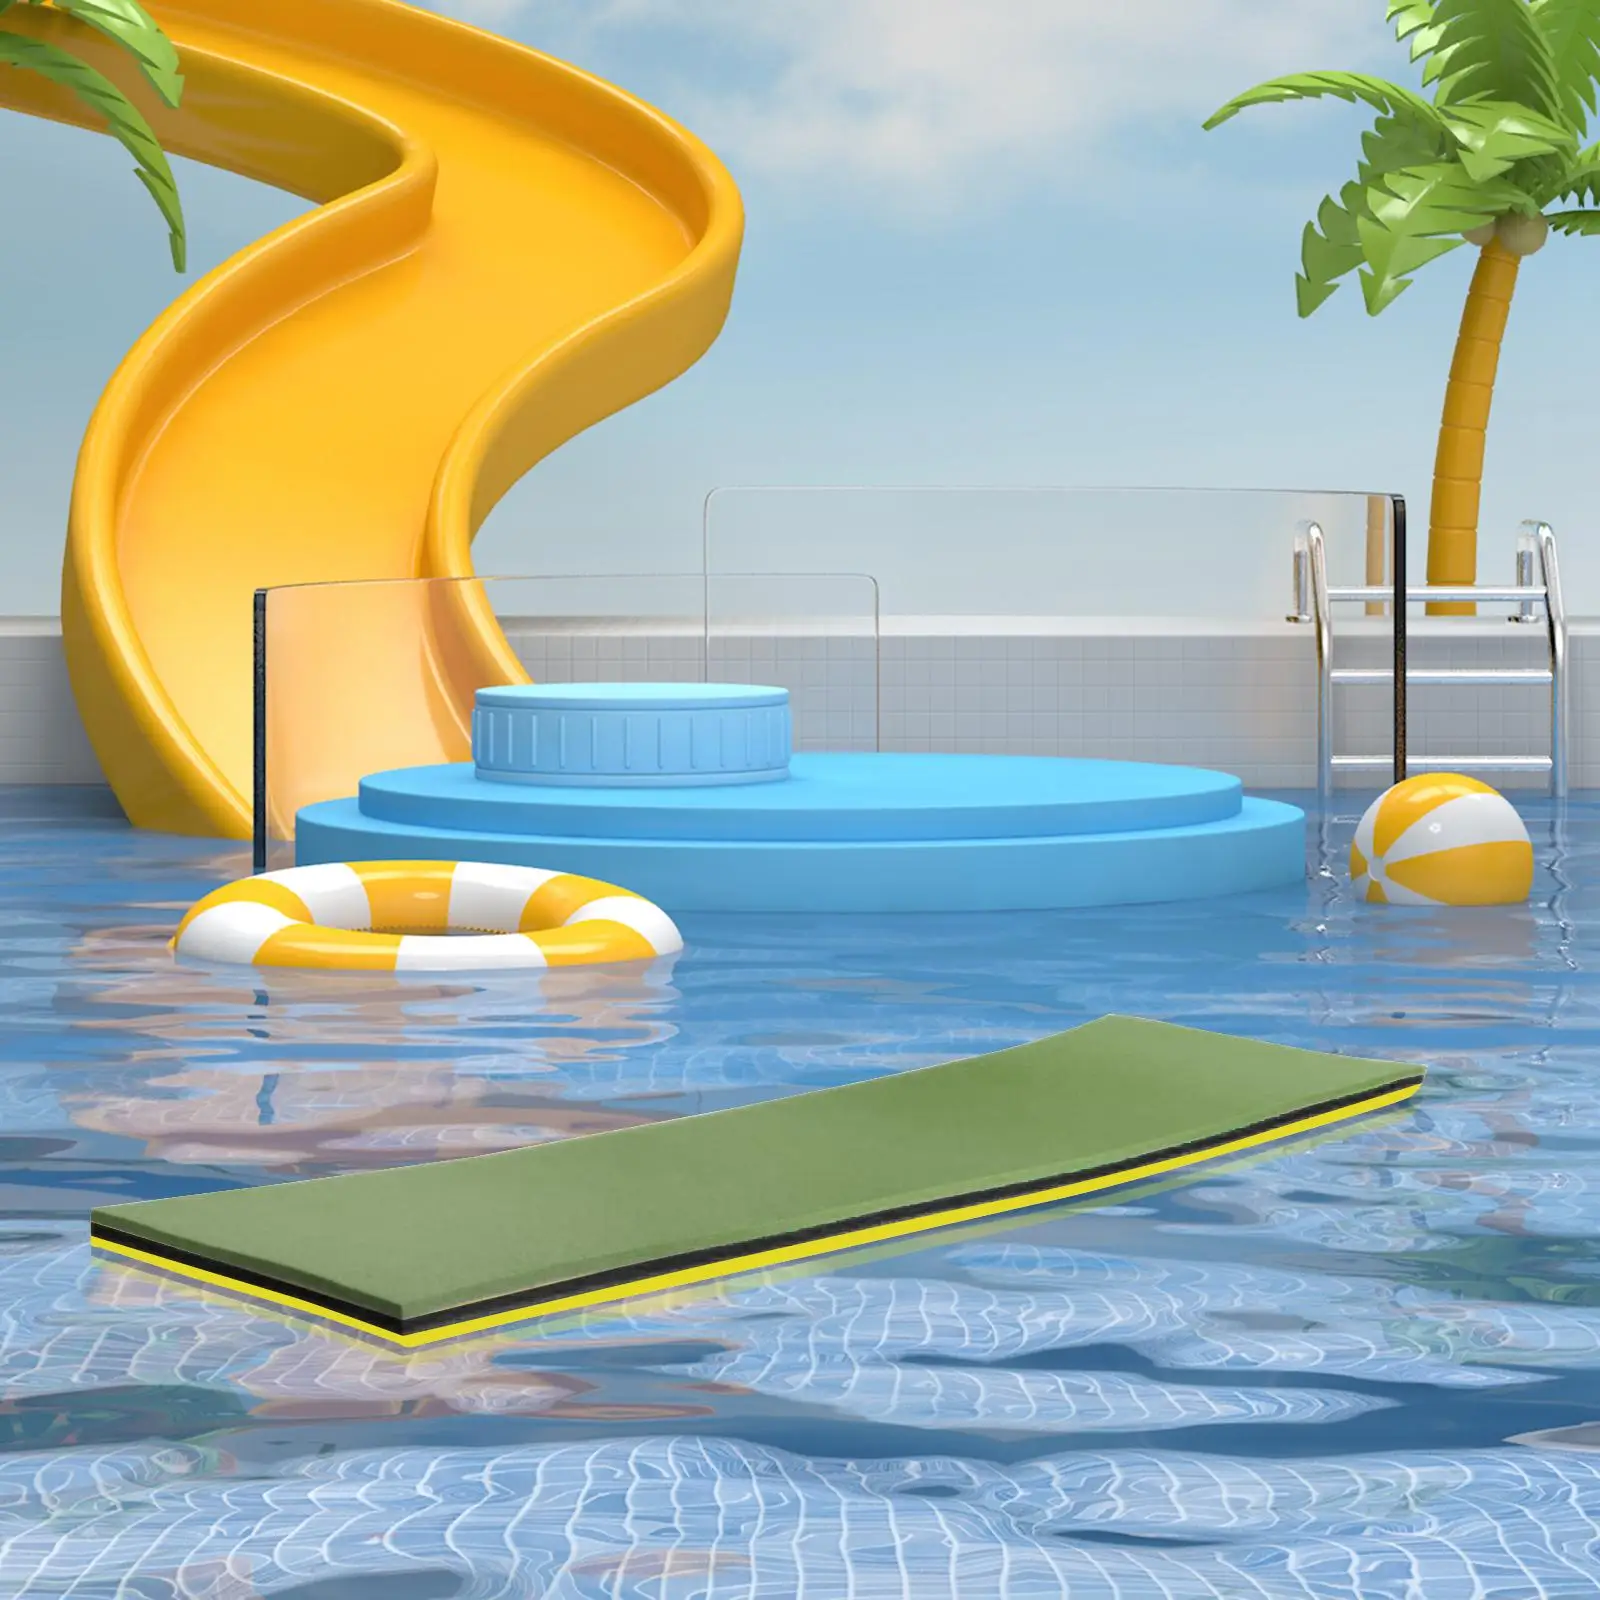 Floating Mat Water Pad Cushion 43x15.7x1.3inch for Water Parks, Pools, Lakes, Beaches and Sea Sturdy Xpe Foam Mat Water Bed